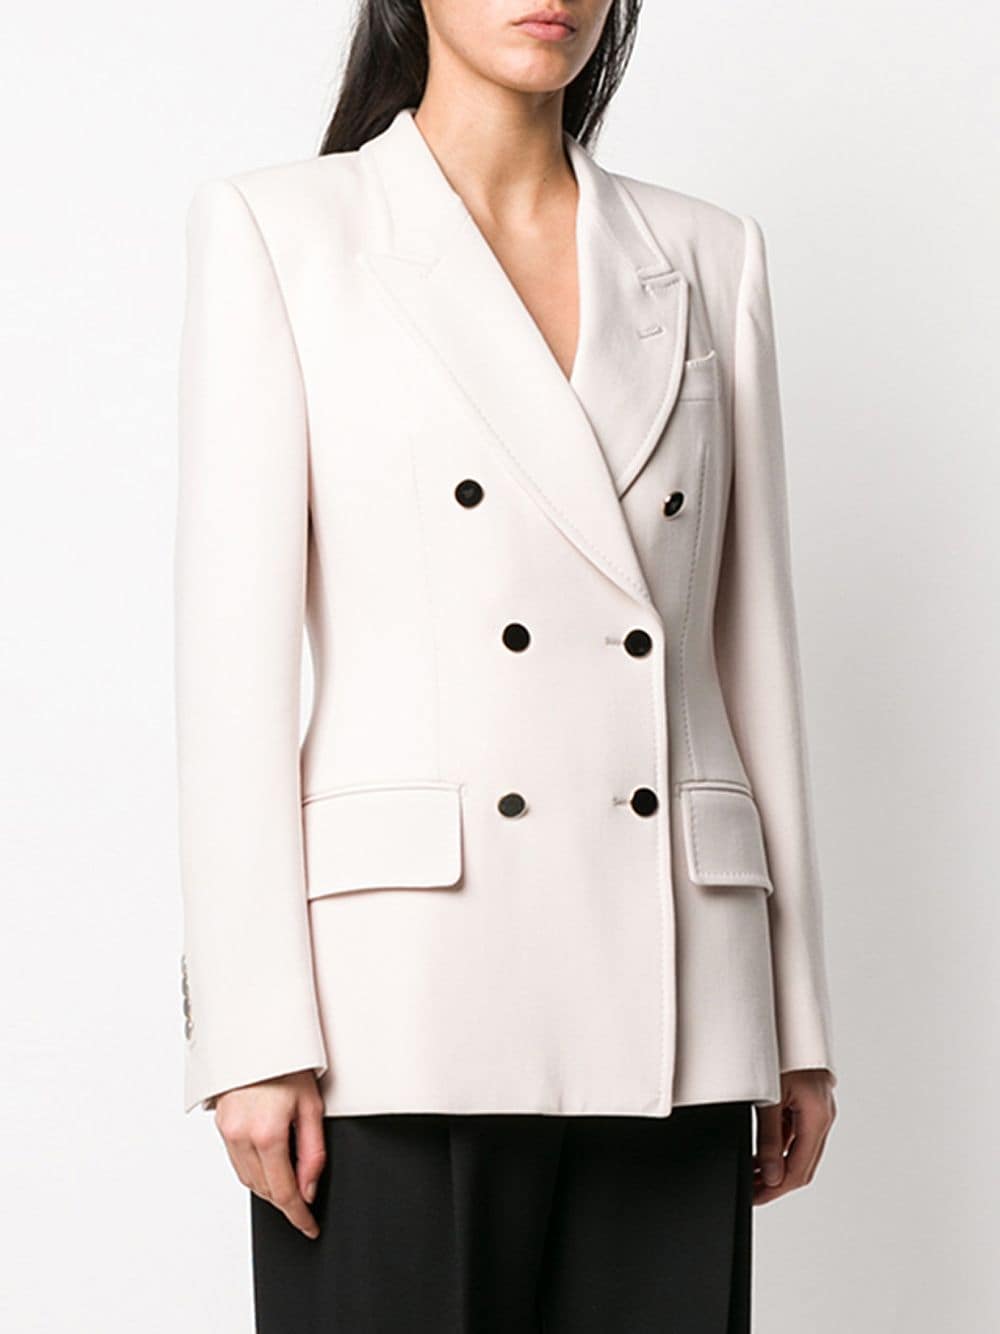 TOM FORD Tailored double-breasted Blazer - Farfetch